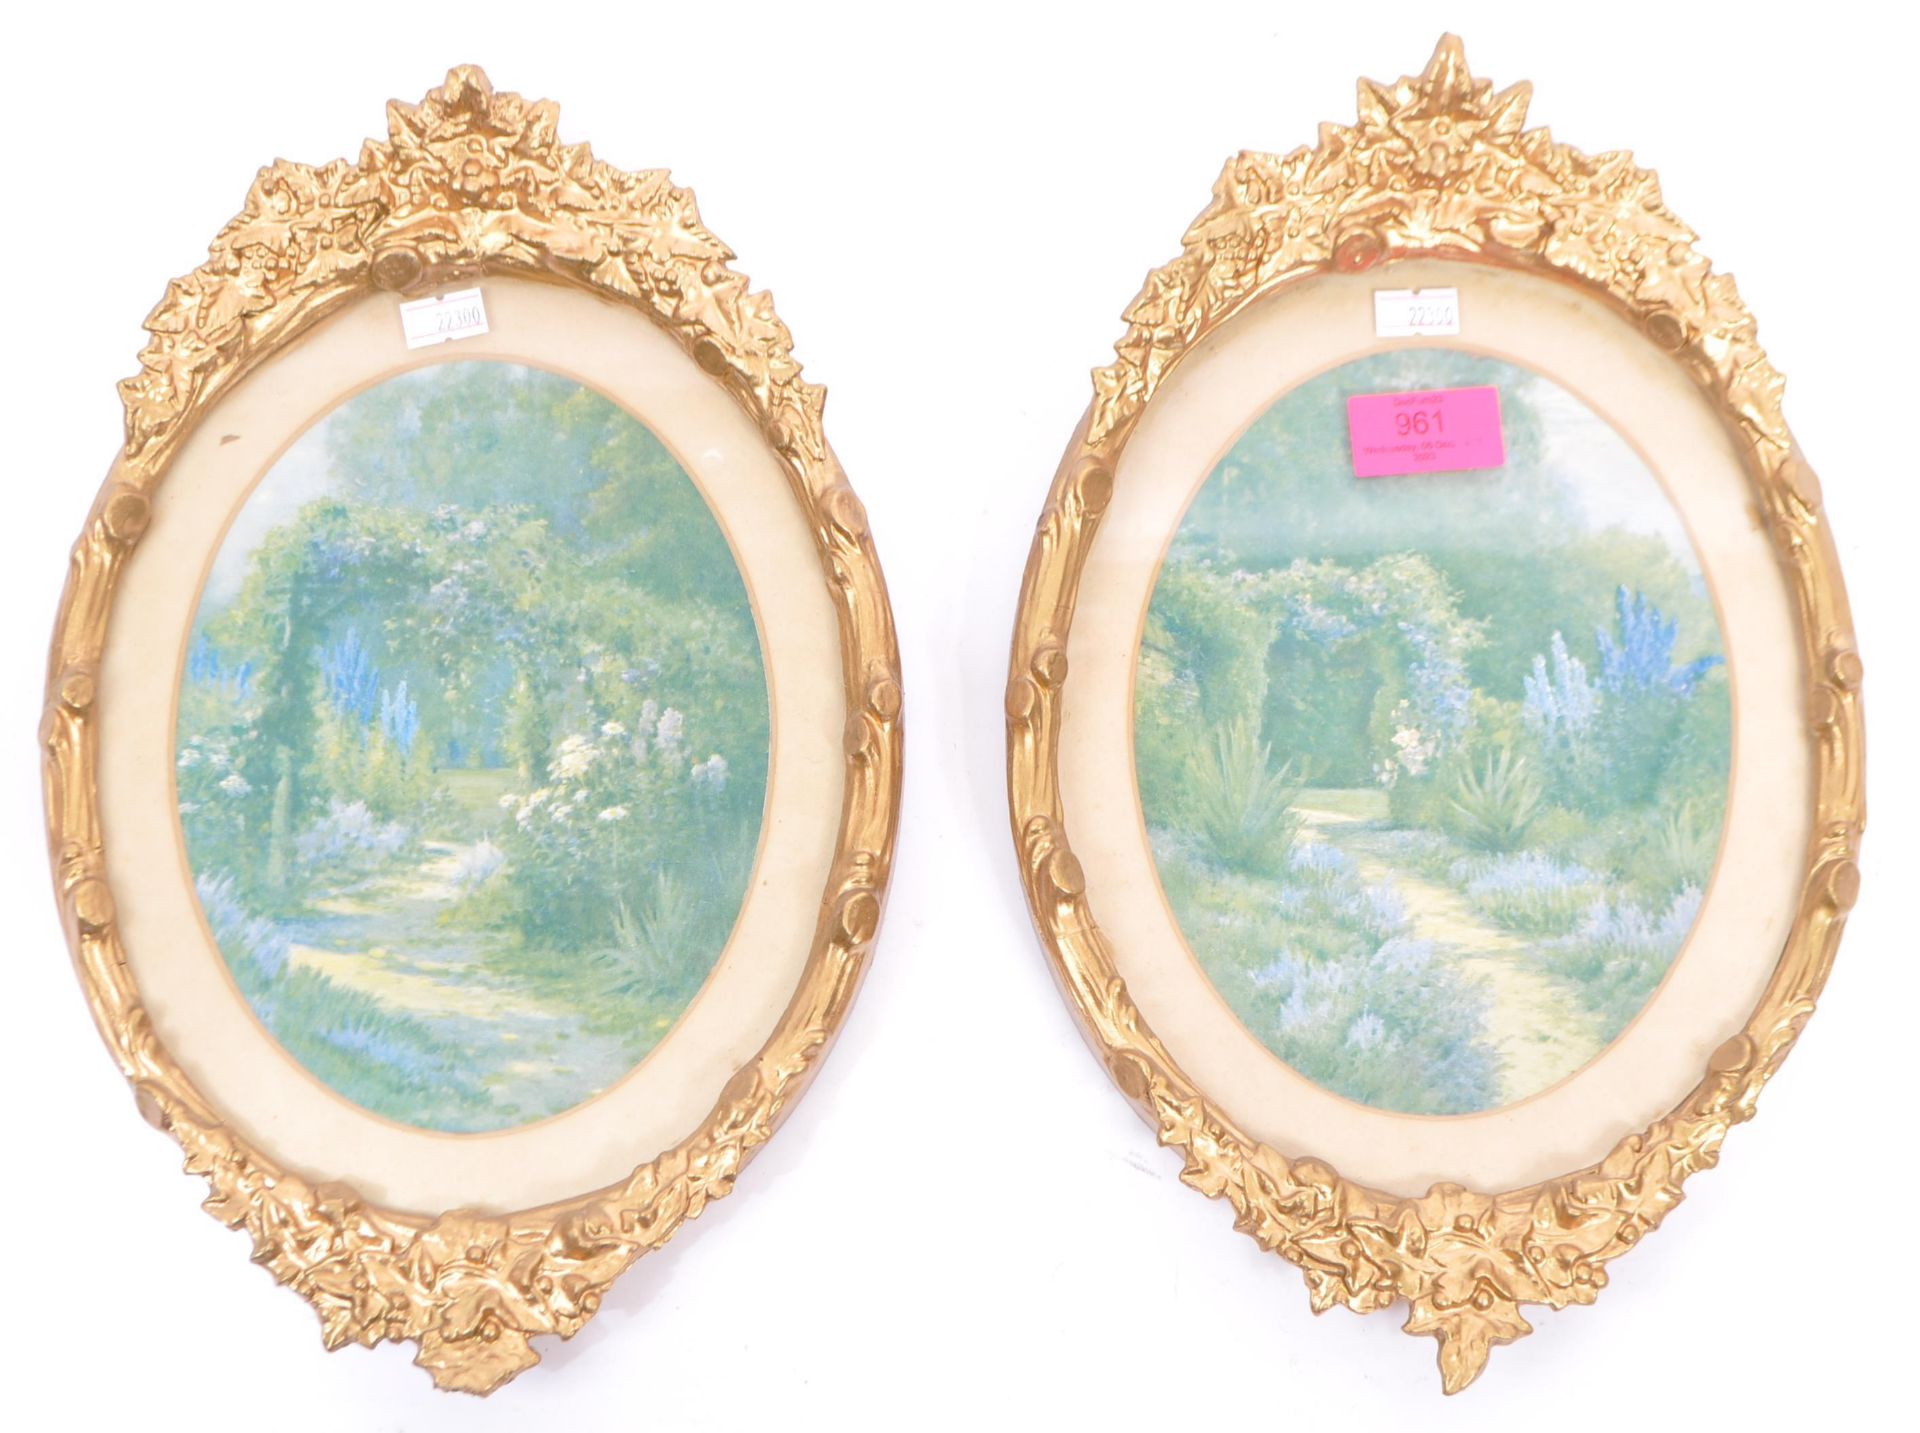 PAIR OF GILT PLASTER ROCOCO PAINTING FRAMES - PRINTS